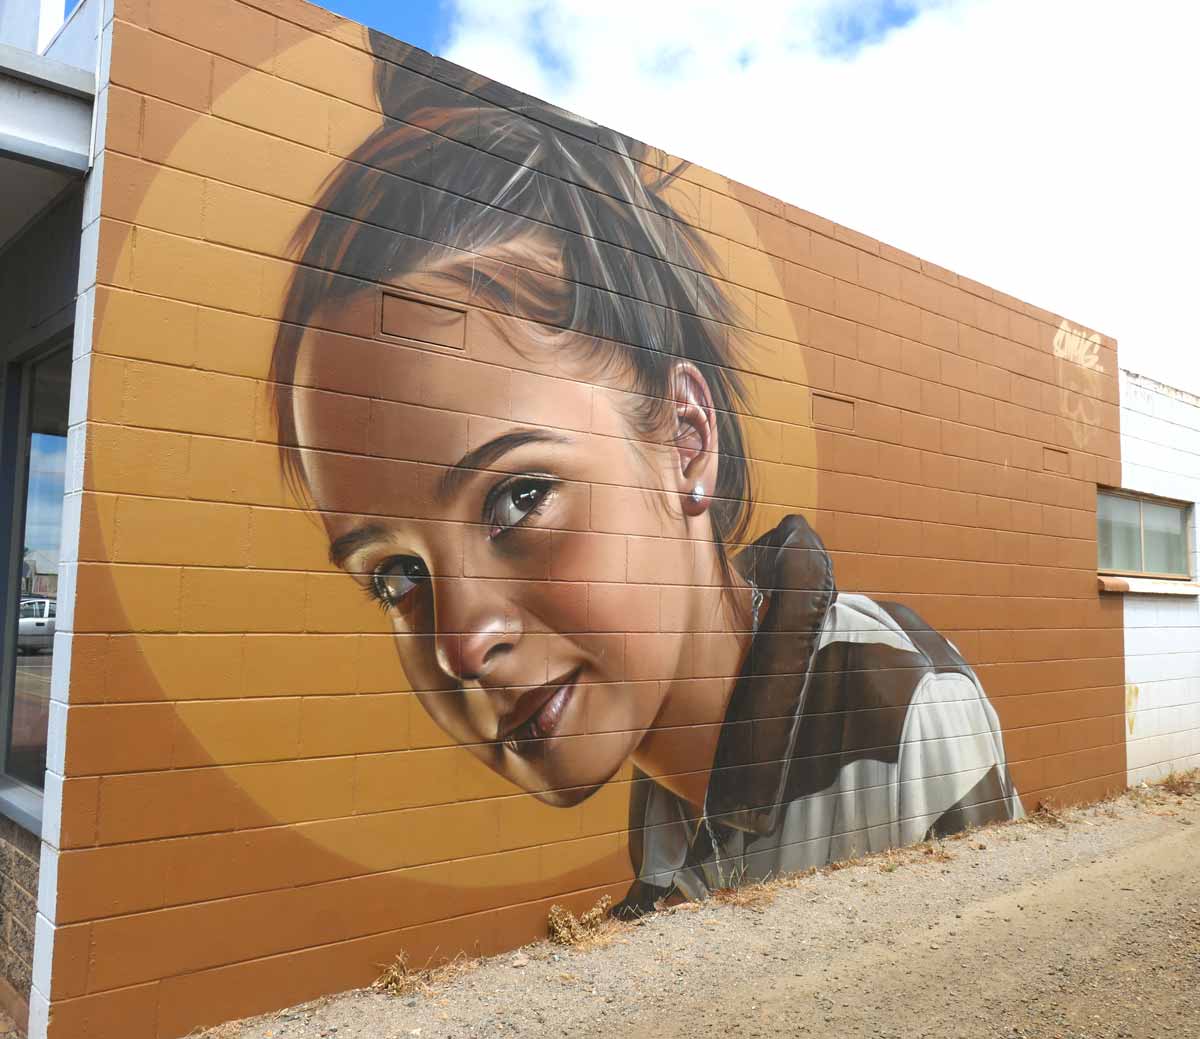 Tumby Bay Street Art 14 - Girl in Striped Polo by Smug. Located in Tumby Bay, Eyre Peninsula, South Australia.